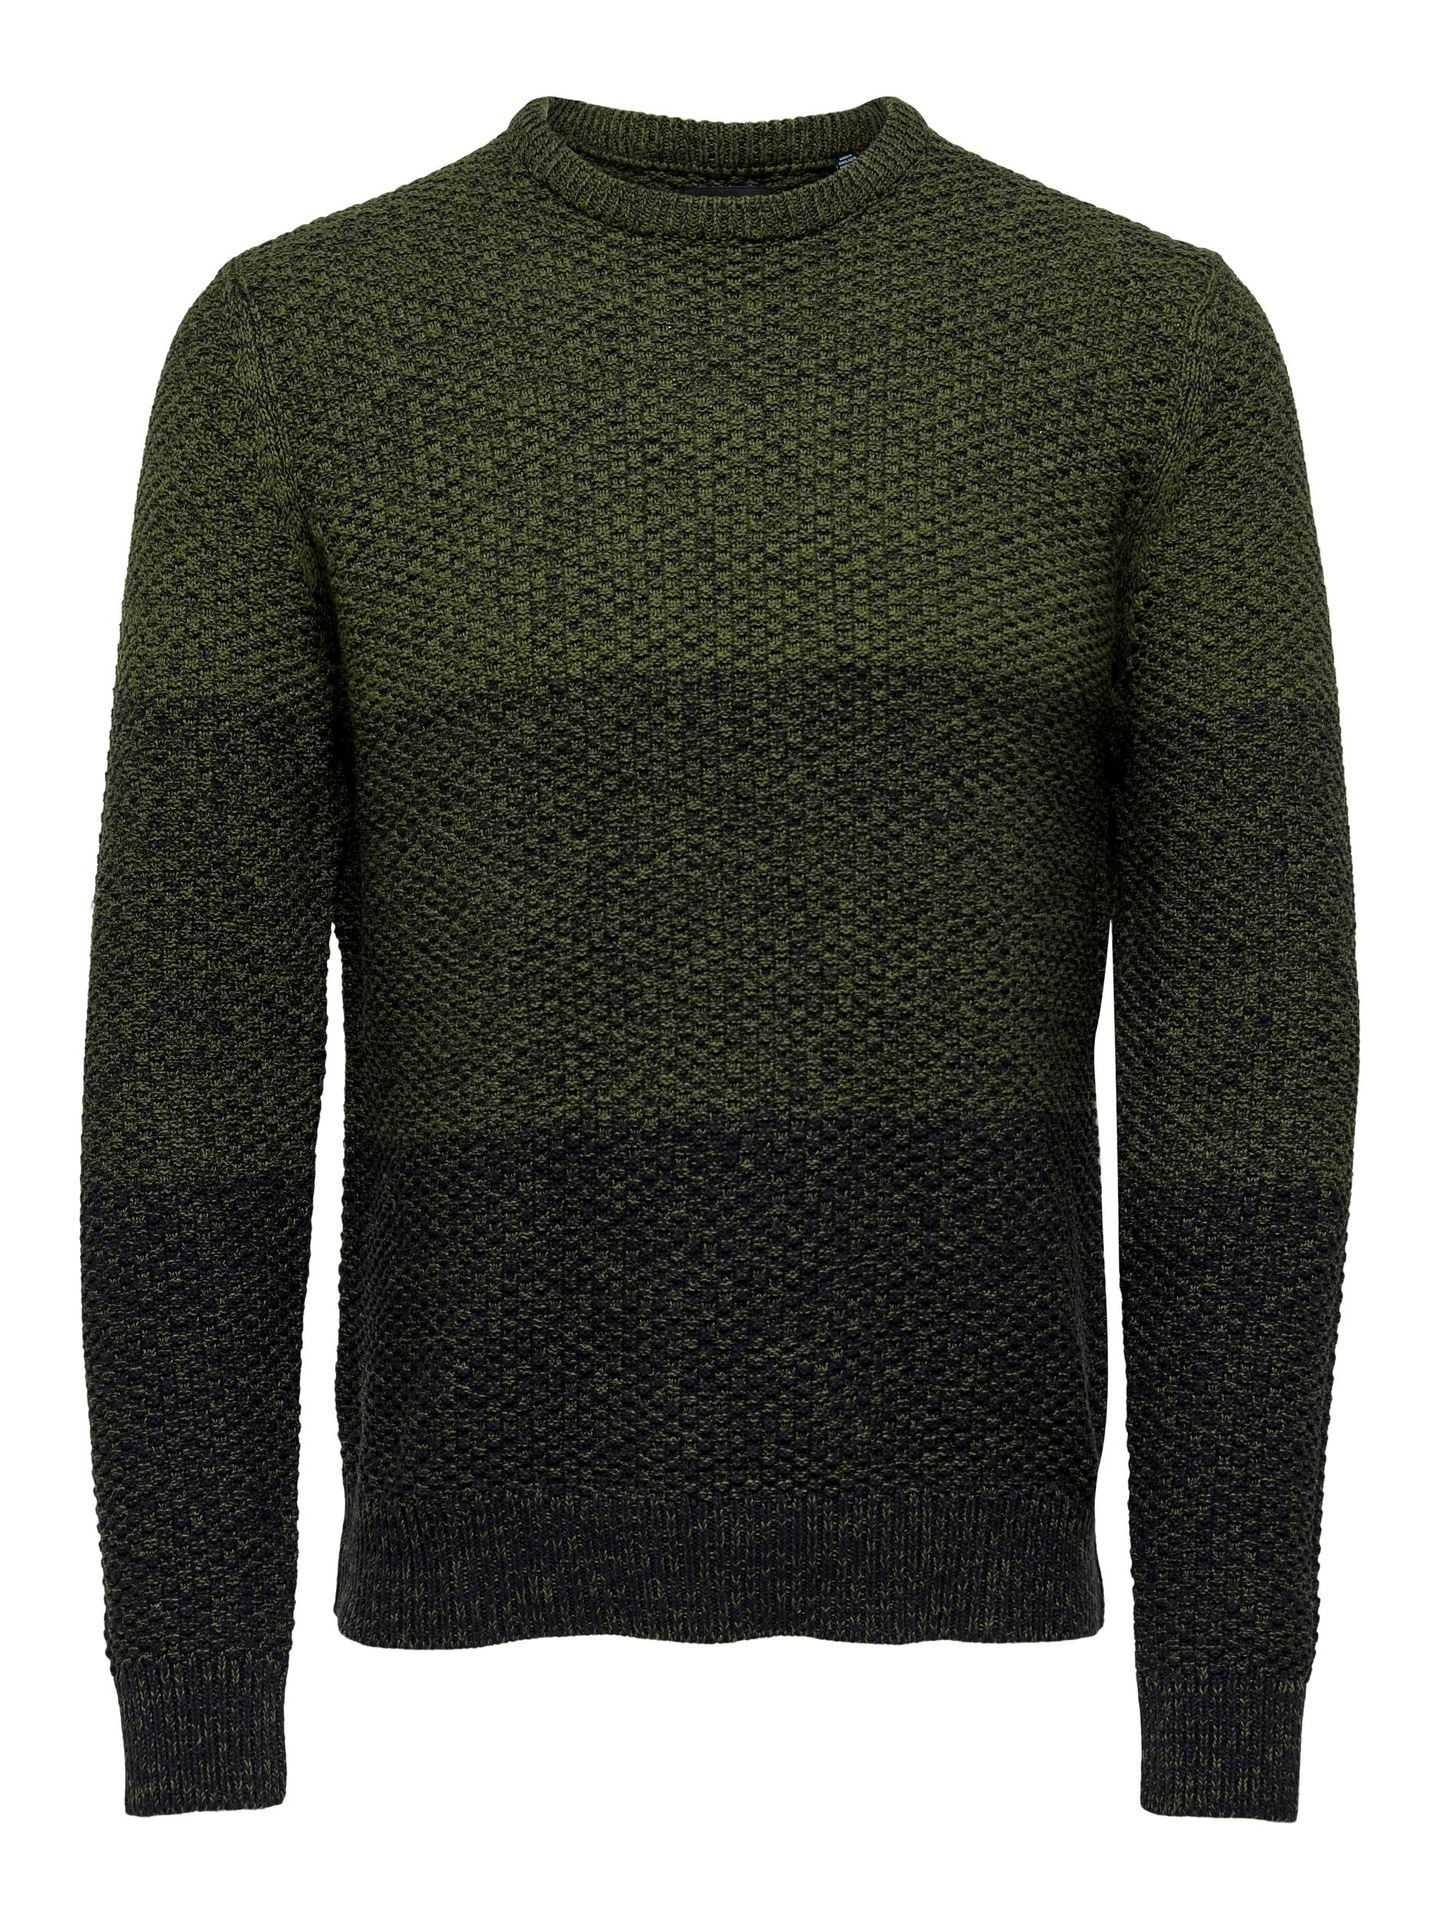 Only & Sons ONSTUCK 7 BLOCK STRUC CREW KNIT - Olive Night/+ BL Olive Night/+ BLACK 2900128562030